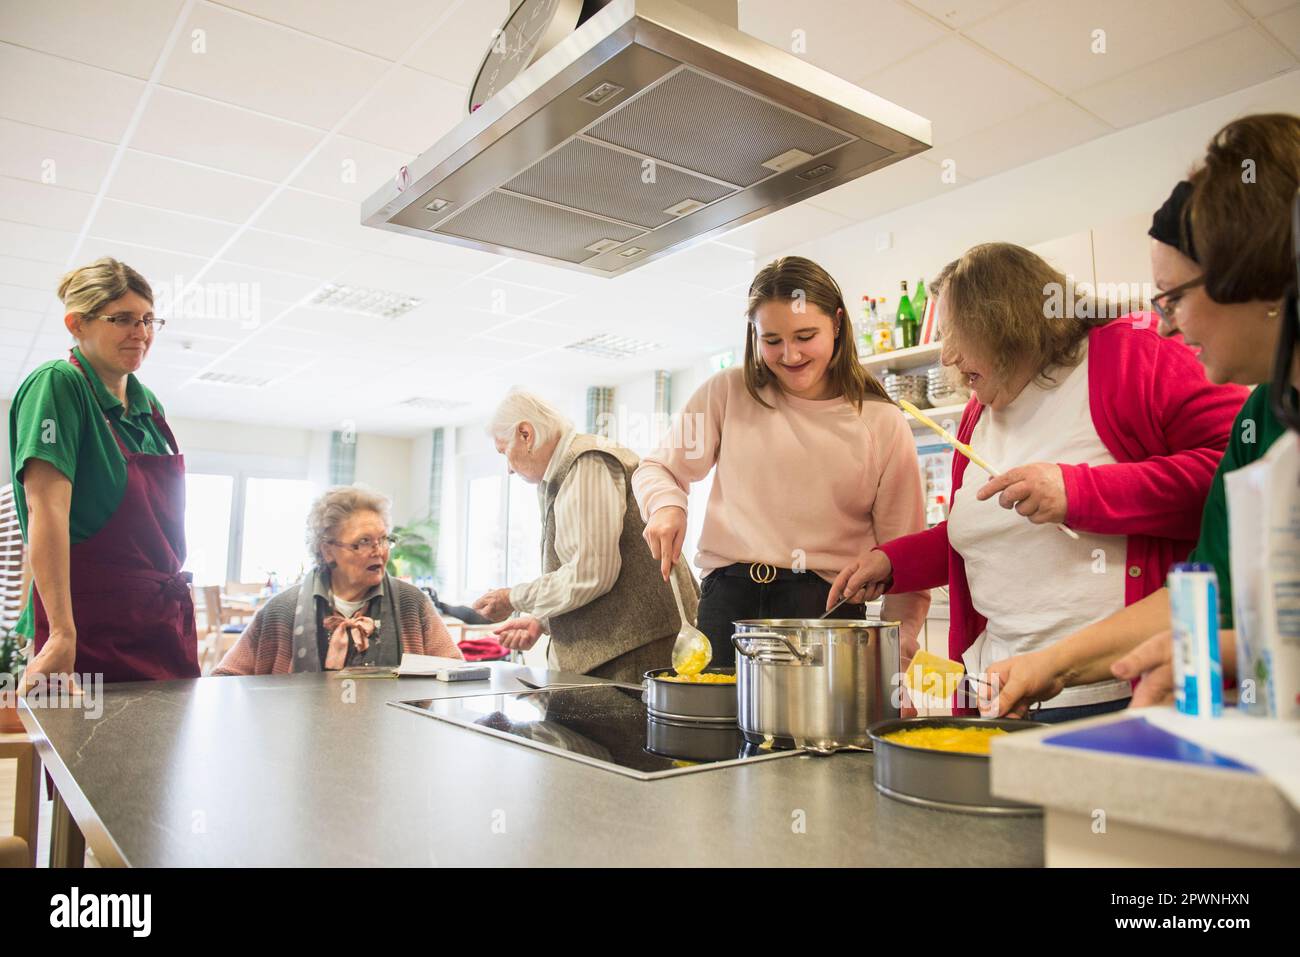 Nurse with senior women and girls preparing food at rest home Stock Photo